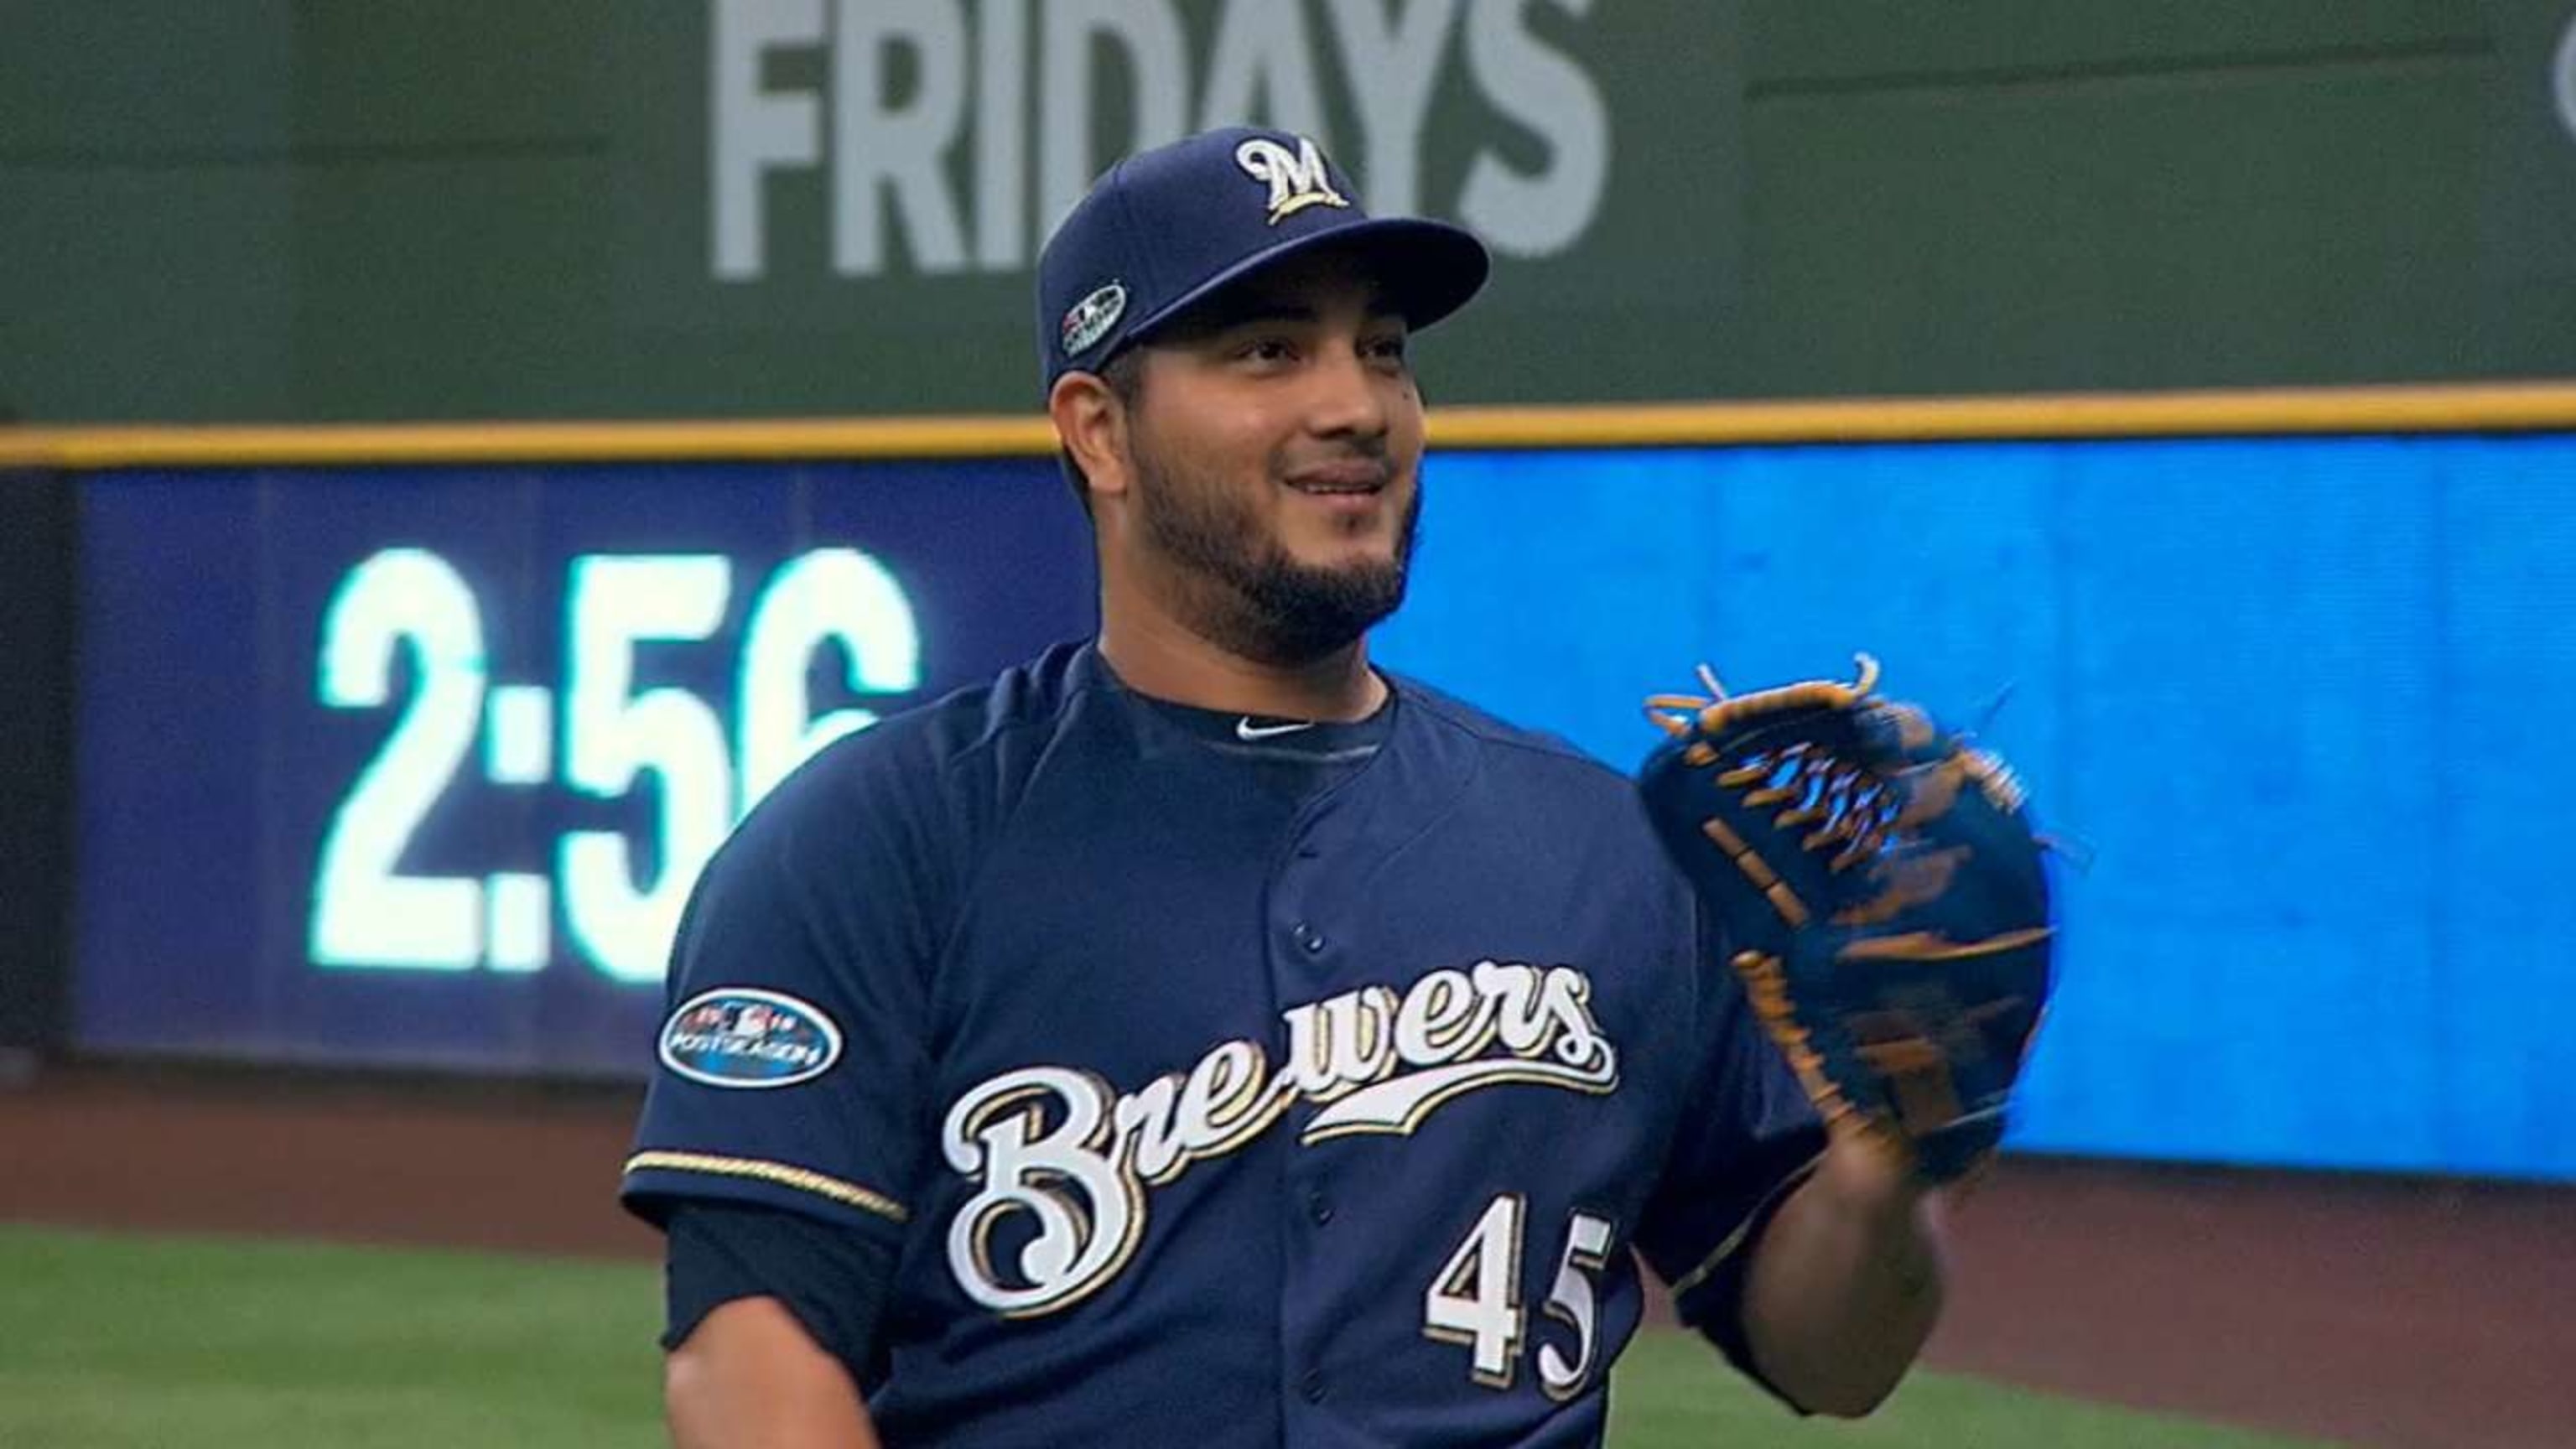 Jhoulys Chacín continues to roll for the Brewers